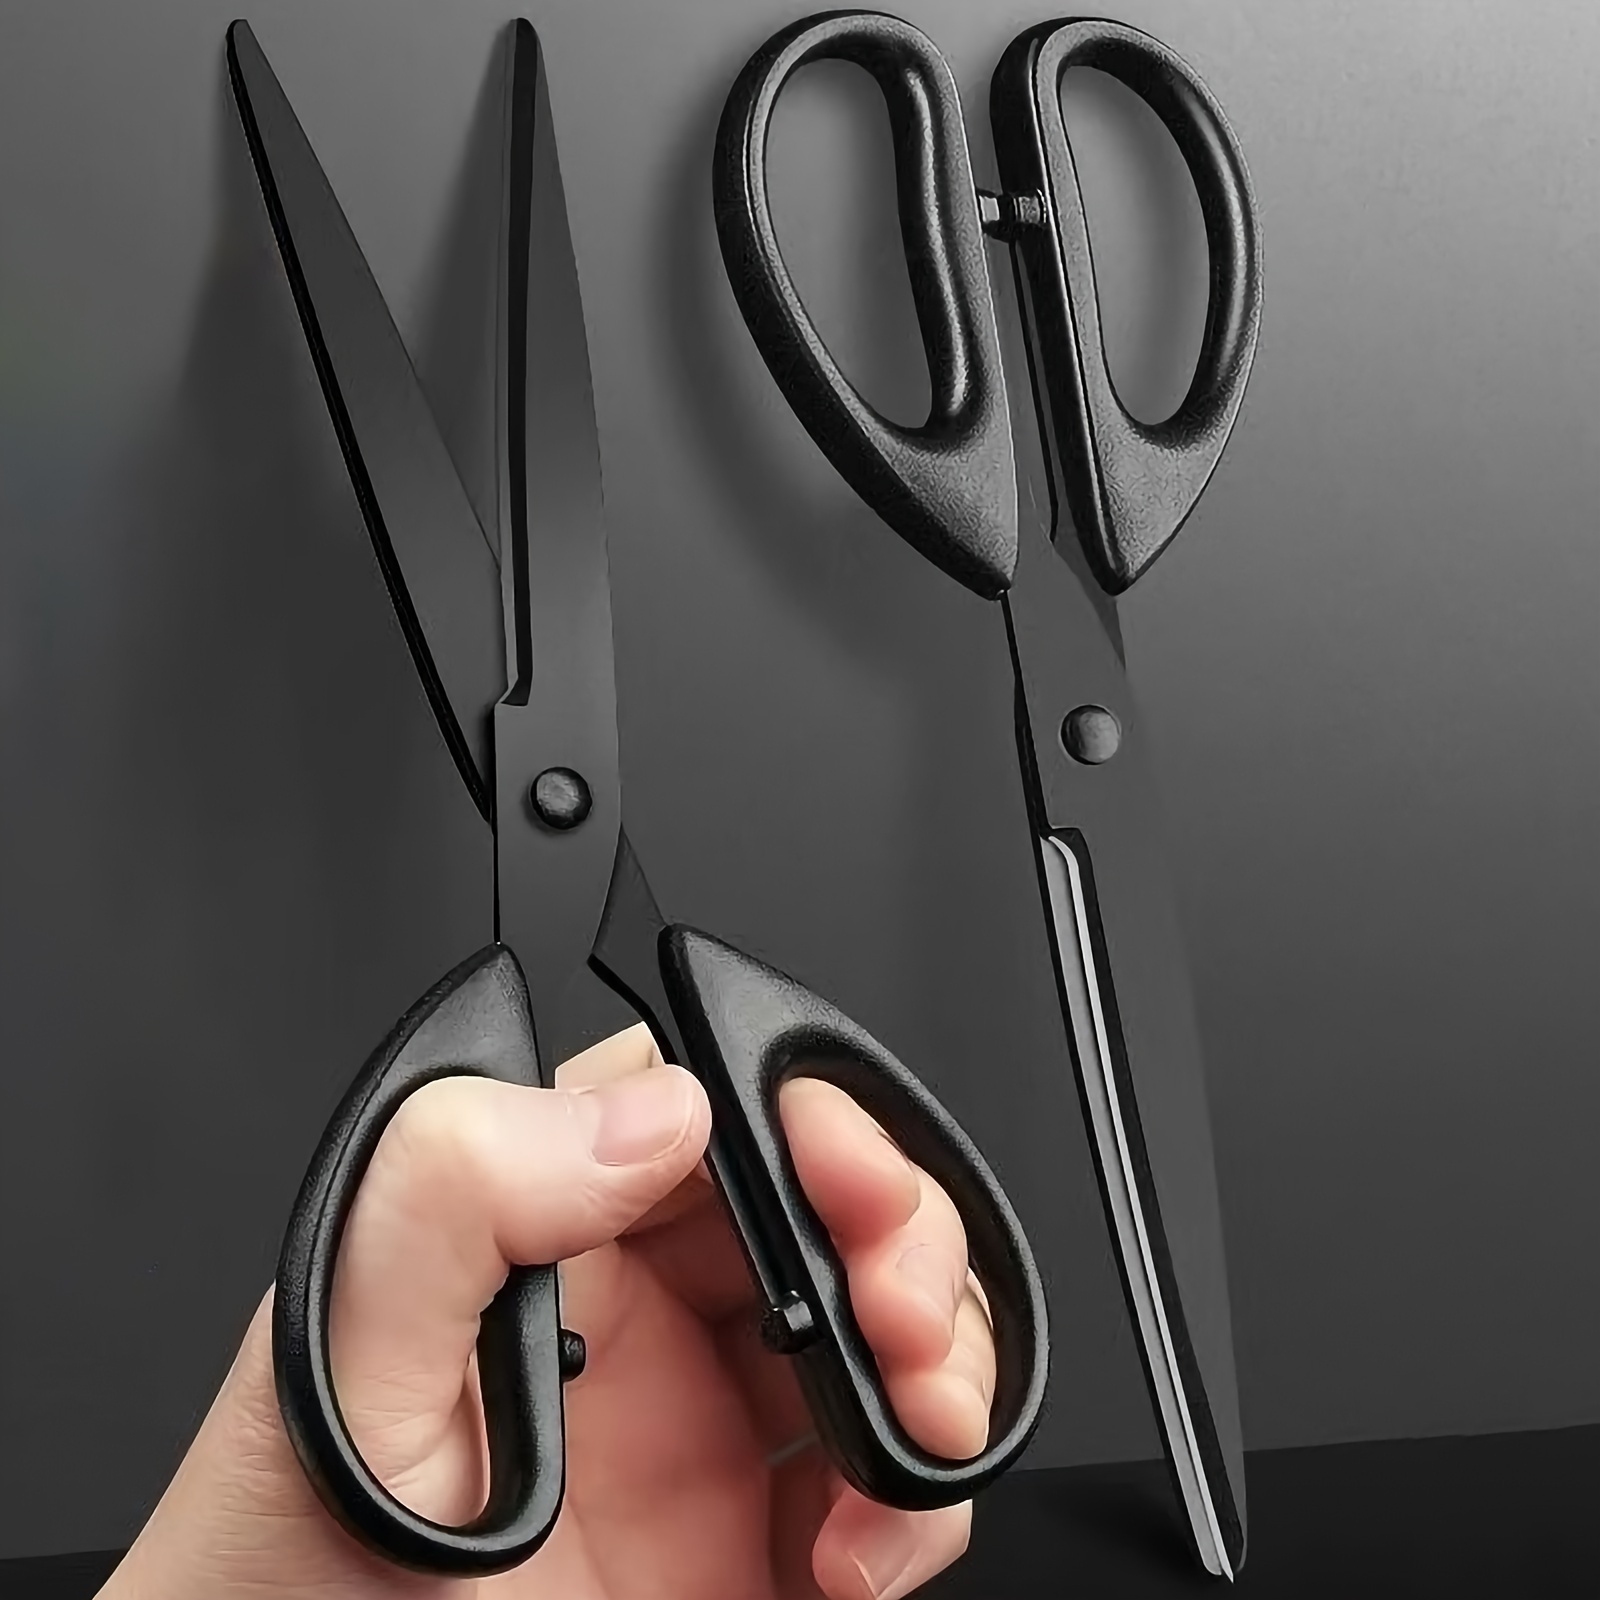 

1pc Large Thickened Black Edge Scissors, Blackening Anti-rust Craft, With Non-stick Coating, Widely Suitable For Daily Home, Office, Art Paper Cutting And Tape Cutting.